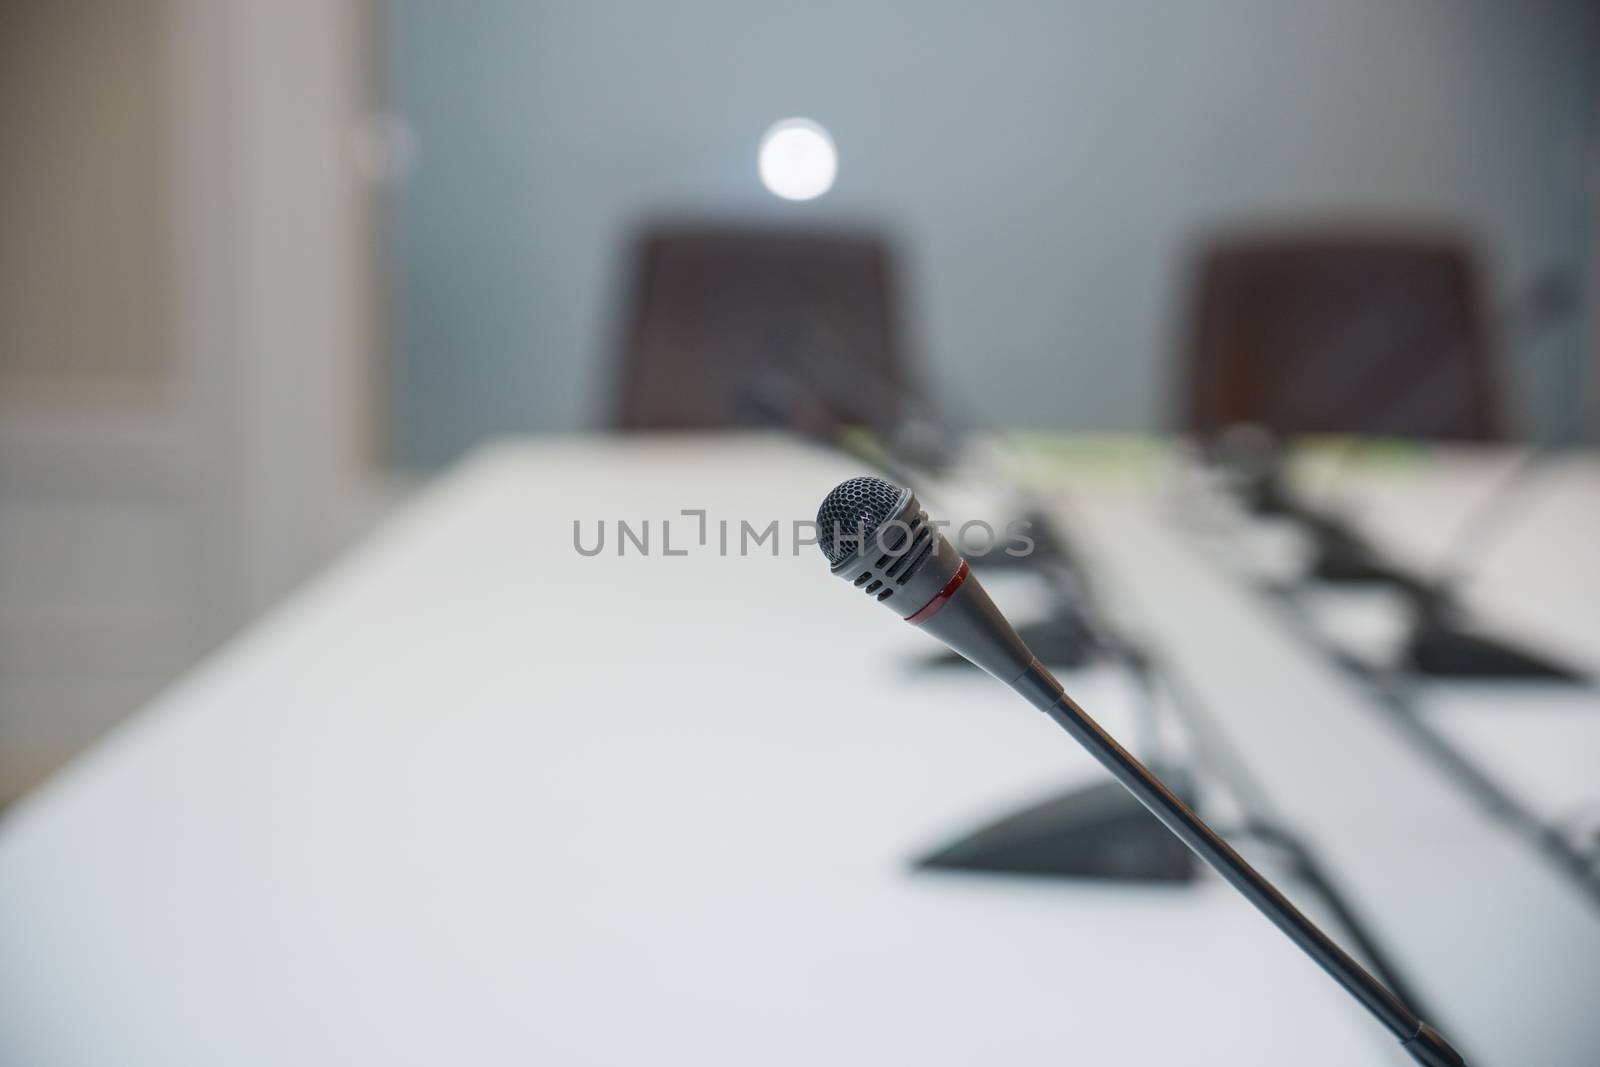 Soft and select focus Conferrence System chairman, delegate unit many microphone in the white business meeting room desk office table of the workplace.